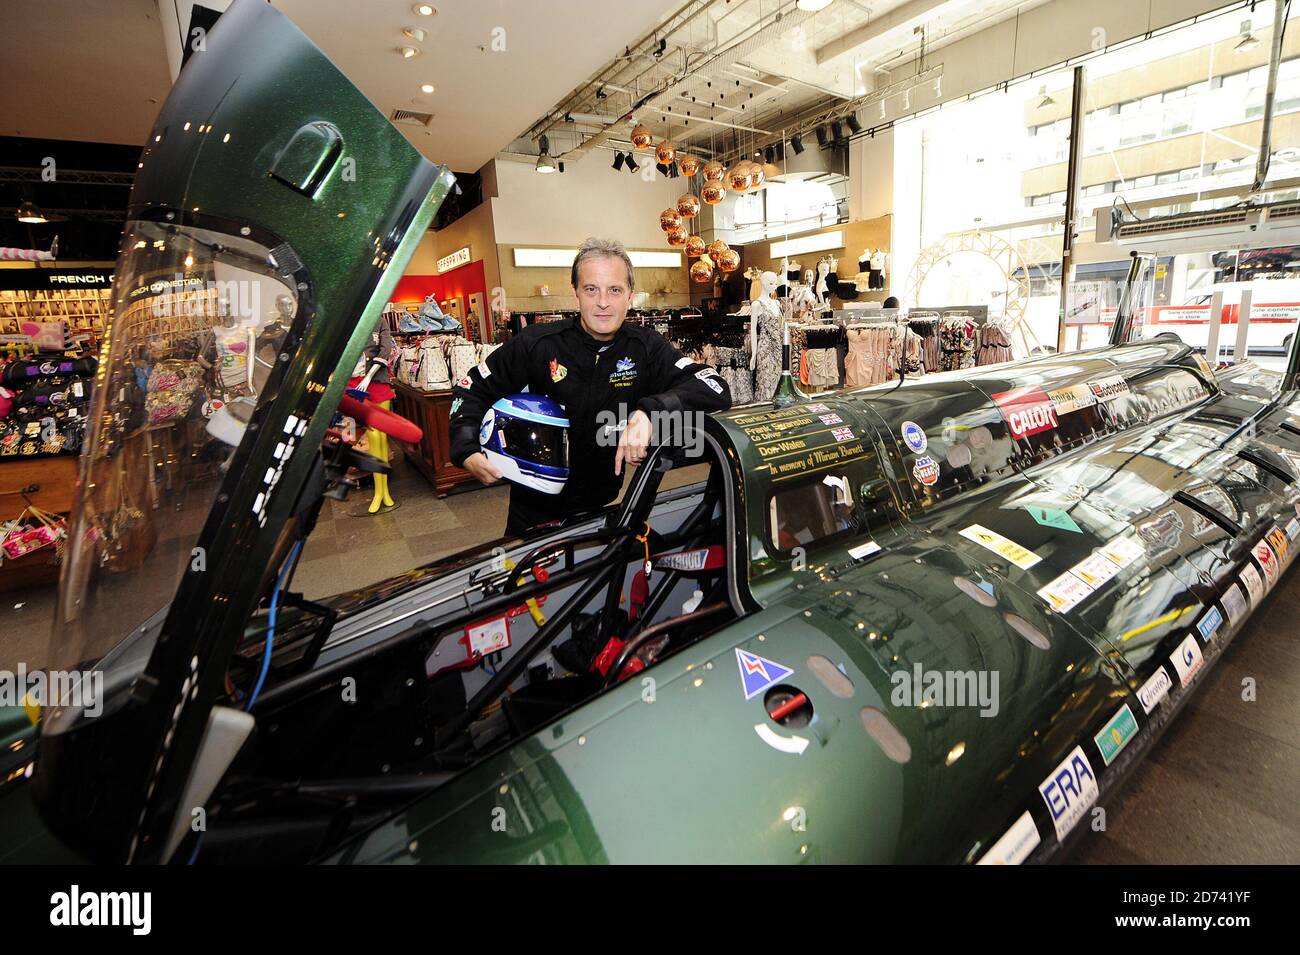 Driver Don Wales poses with the British Steam Car in Selfridge's store in central London. The car broke the land speed record for a steam-powered vehicle, reaching 139 mph in August 2009, and will be on display at Selfridge's all week.  Stock Photo